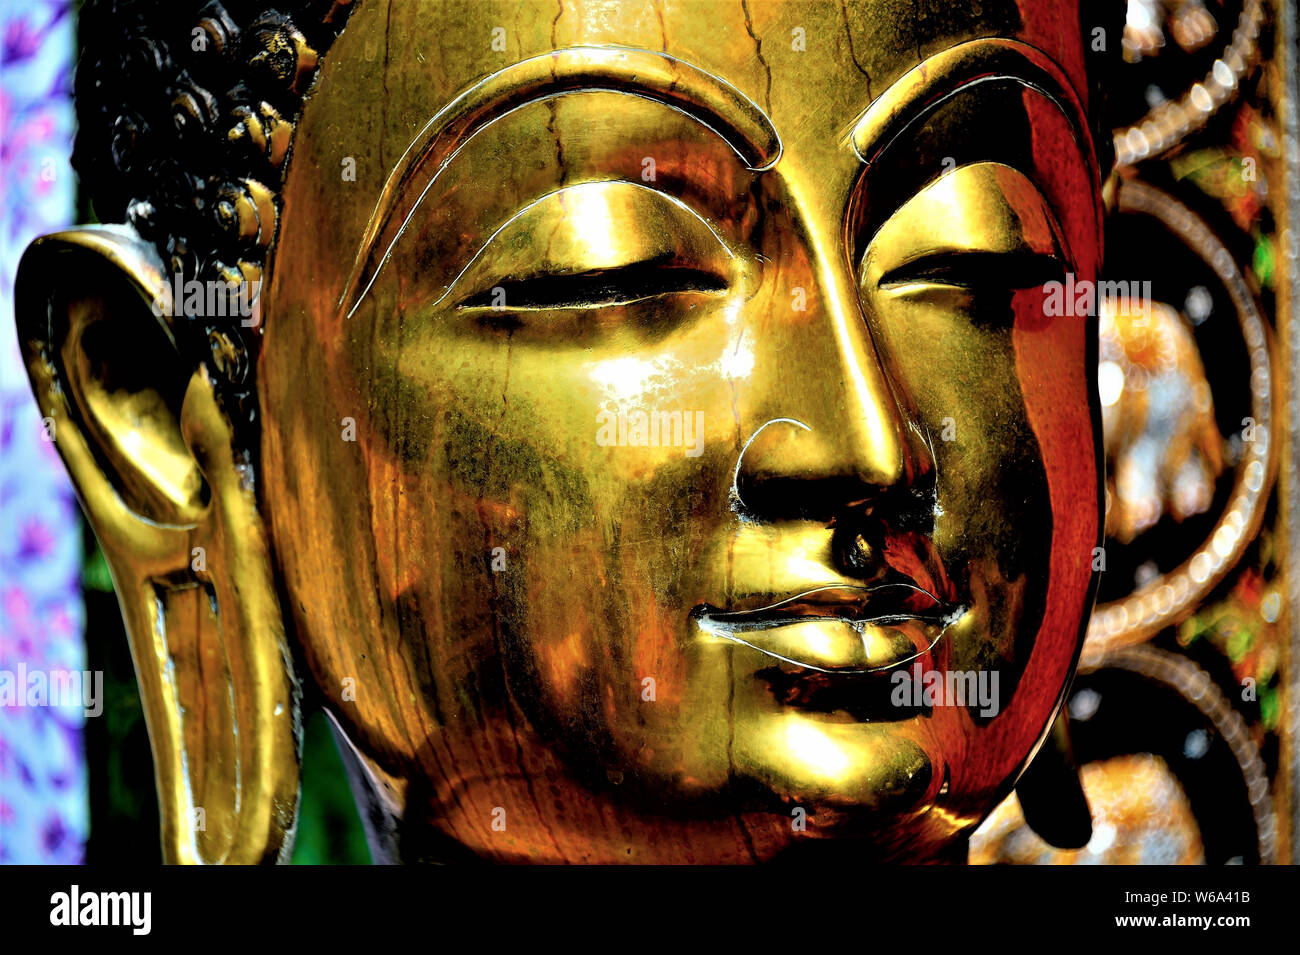 Close up of brass statue of Buddha showing face with calm expression and rich metallic tones and textures Stock Photo